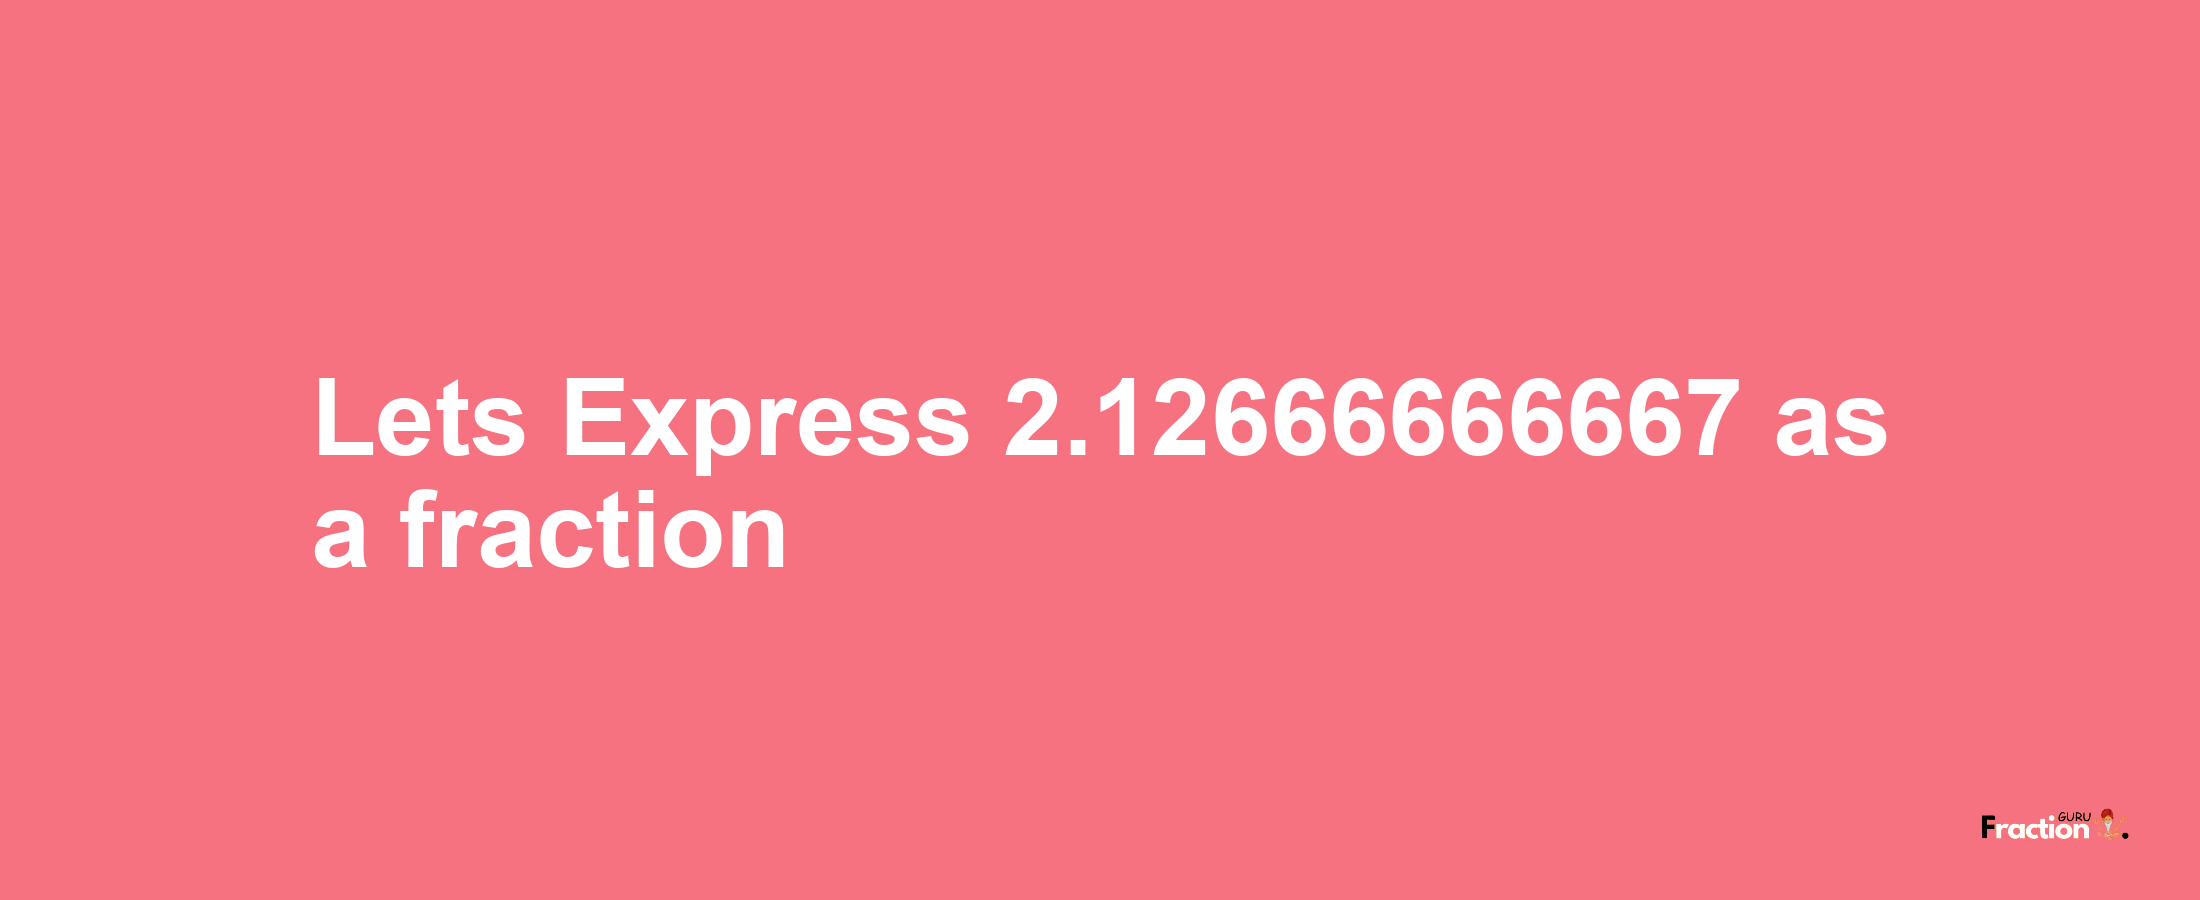 Lets Express 2.12666666667 as afraction